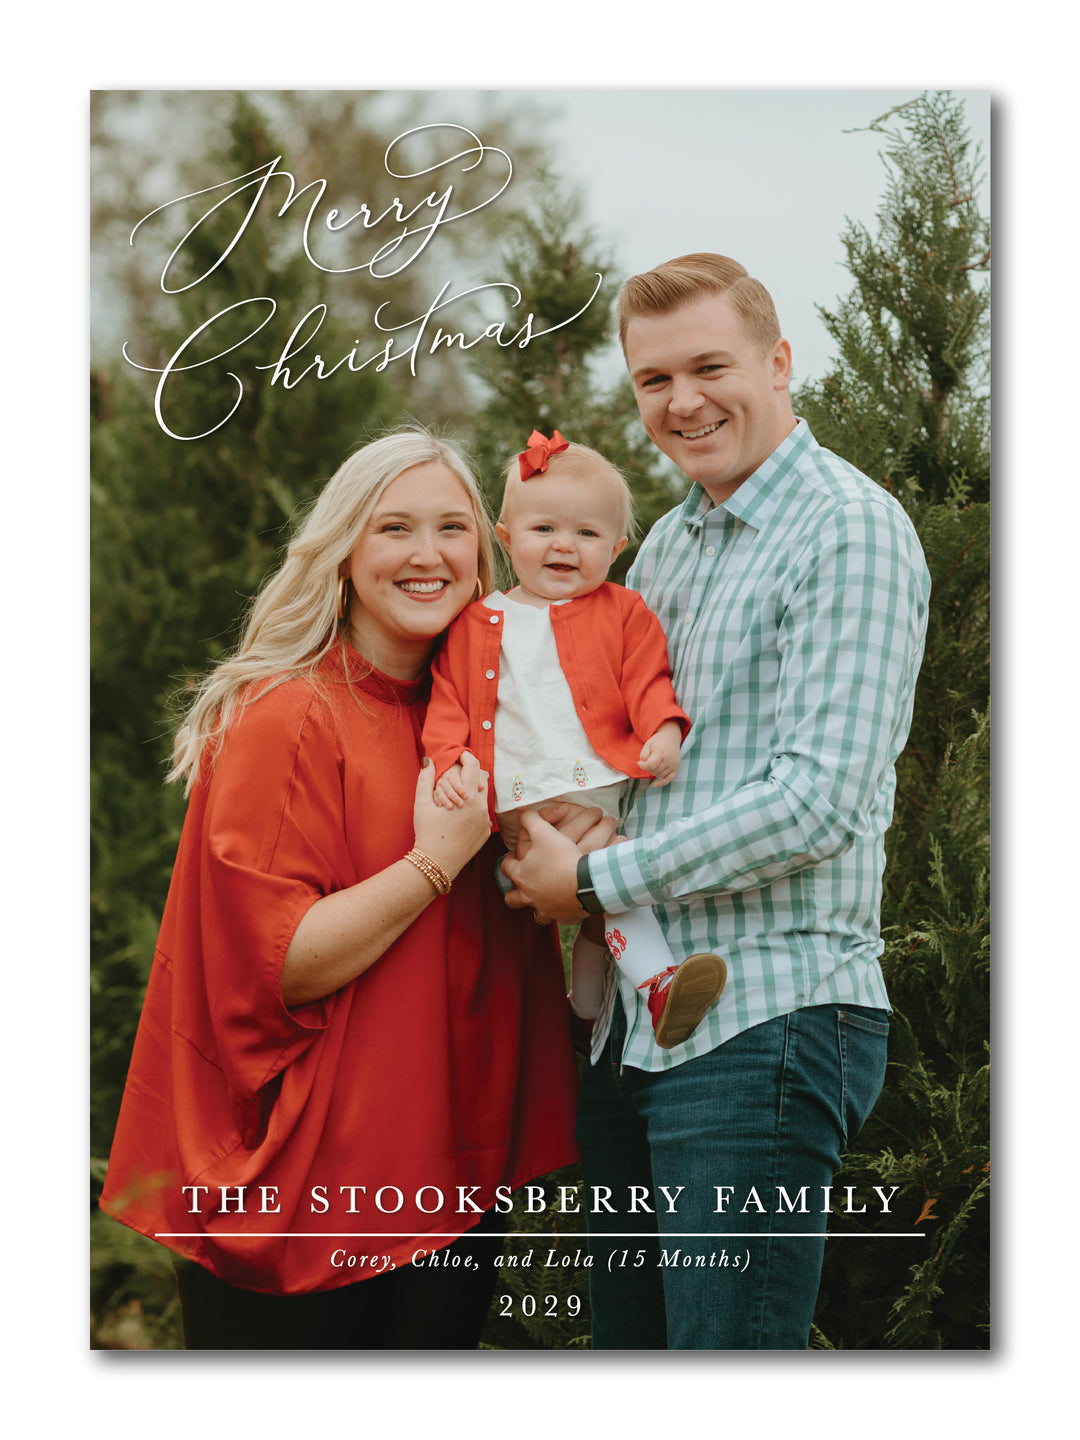 The Stooksberry Christmas Card